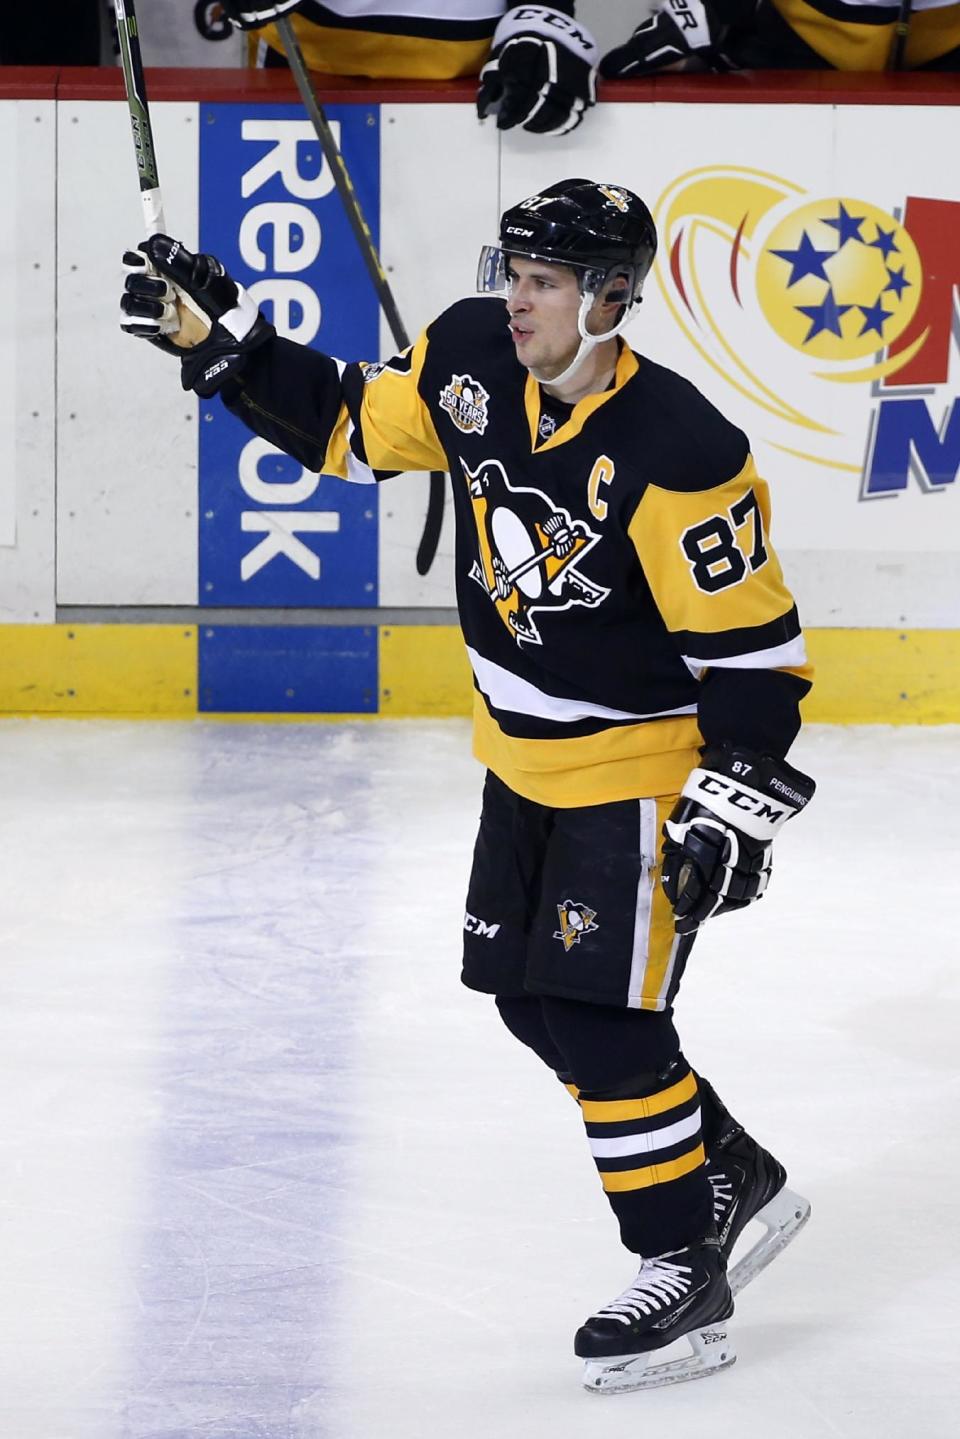 Pittsburgh Penguins' Sidney Crosby acknowledges fans as he skates back to the bench after assisting on a goal by Chris Kunitz, for the 1,000th point of his NHL career, during the first period of the team's hockey game against the Winnipeg Jets in Pittsburgh, Thursday, Feb. 16, 2017. (AP Photo/Gene J. Puskar)